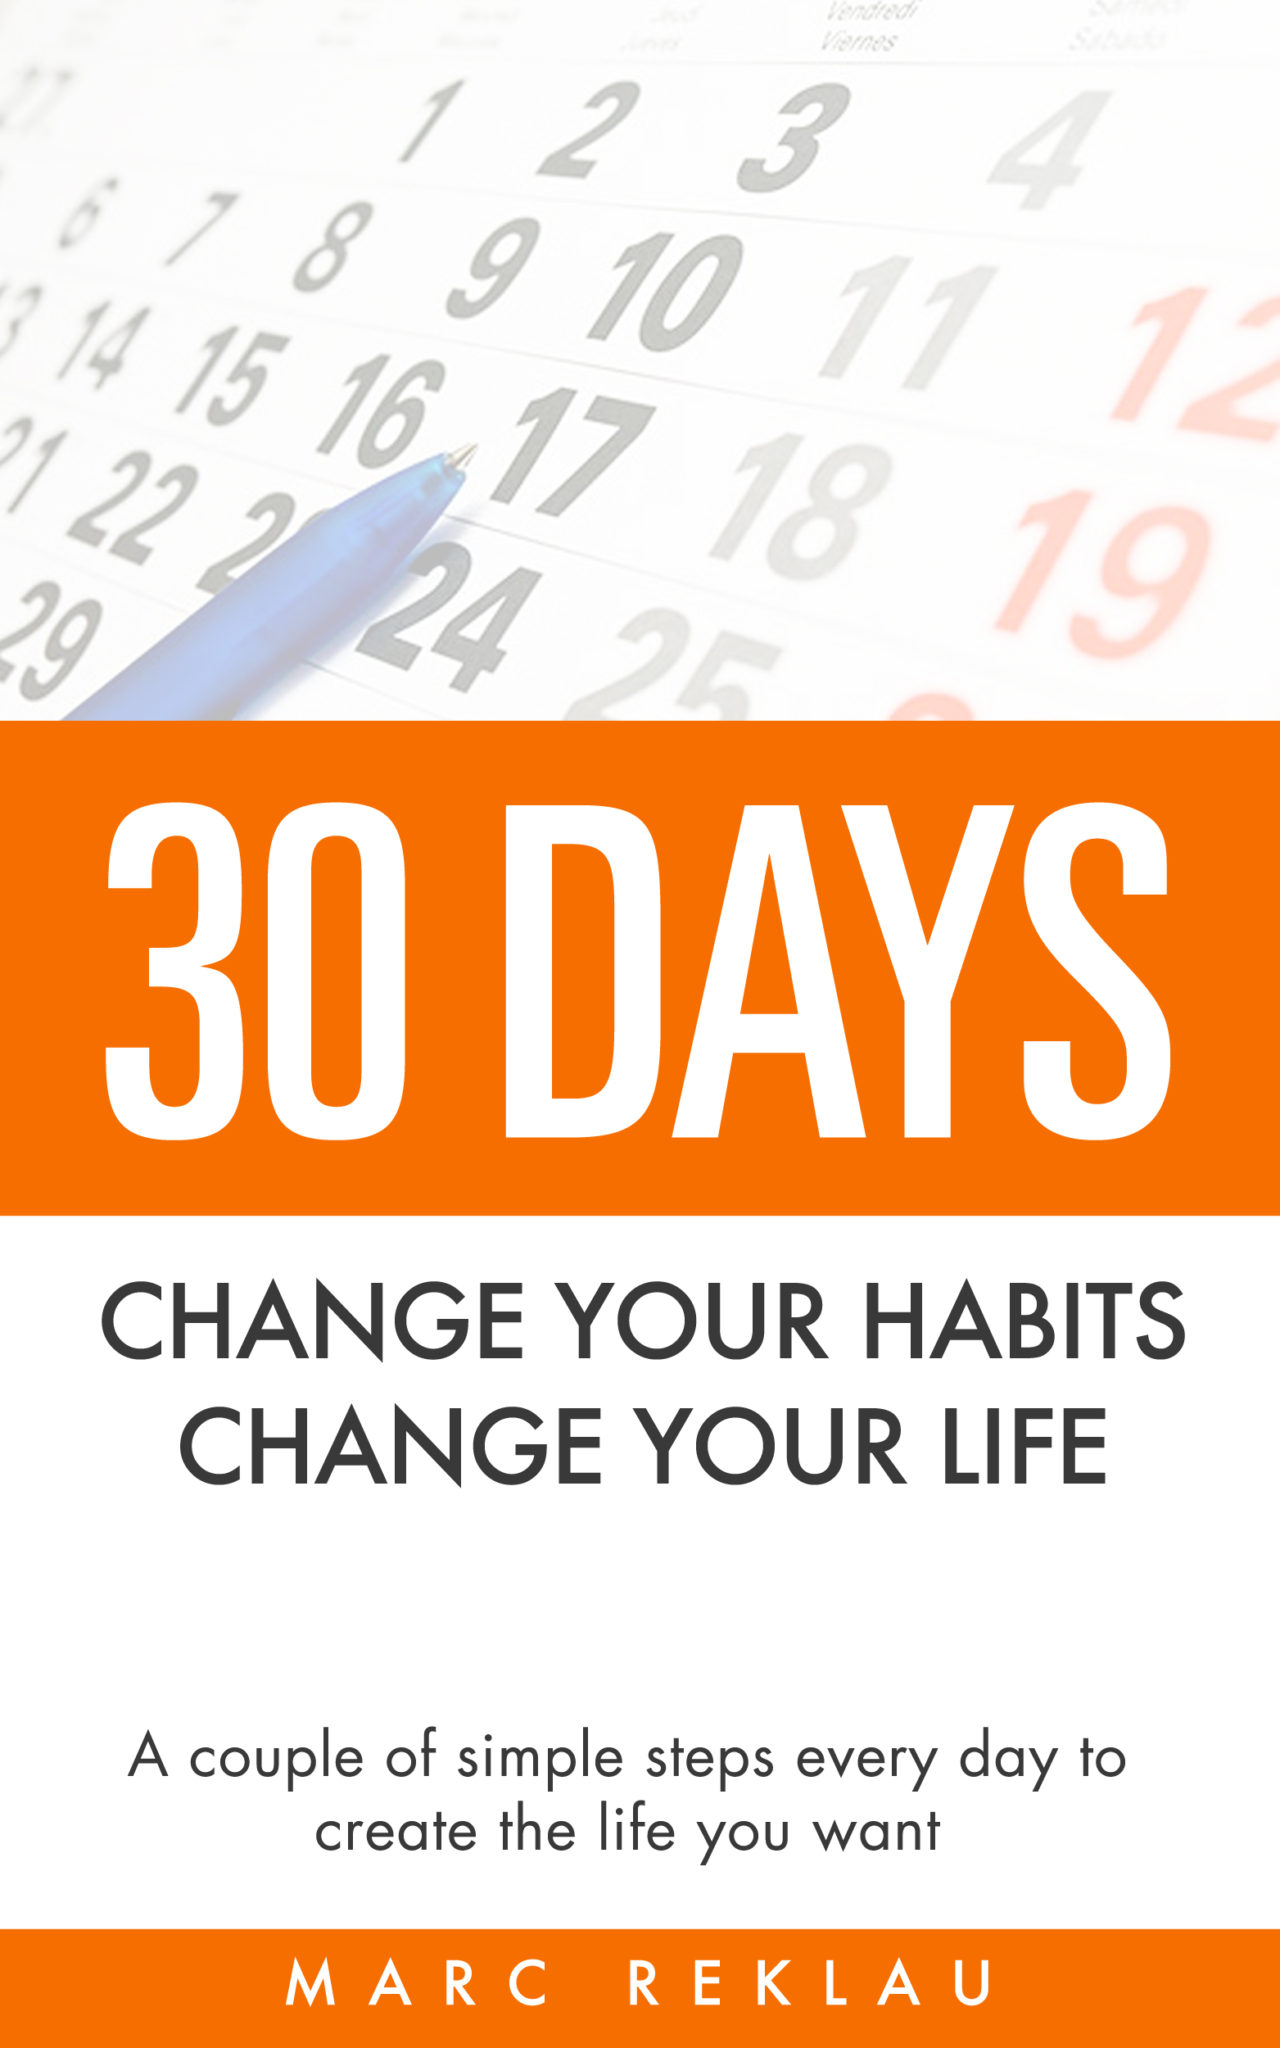 FREE: 30 Days – Change your habits, Change your life by Marc Reklau